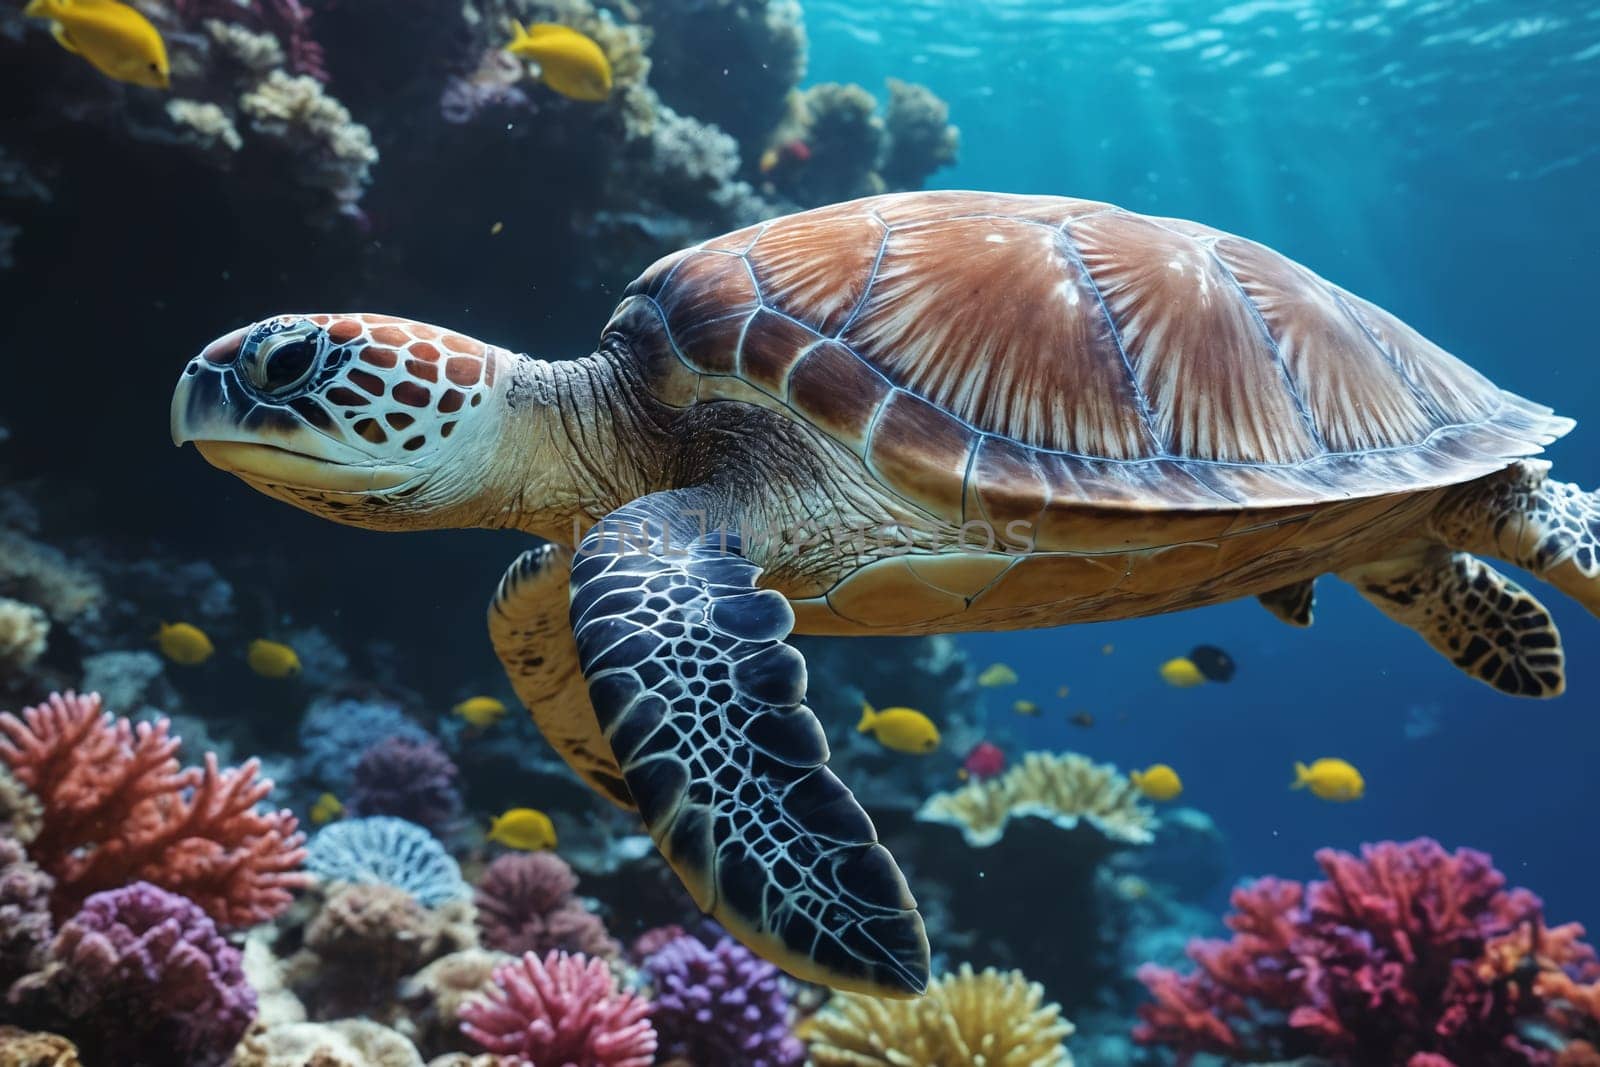 This mesmerizing image features a sea turtle gracefully navigating its underwater world, ideal for promoting marine conservation and biodiversity.